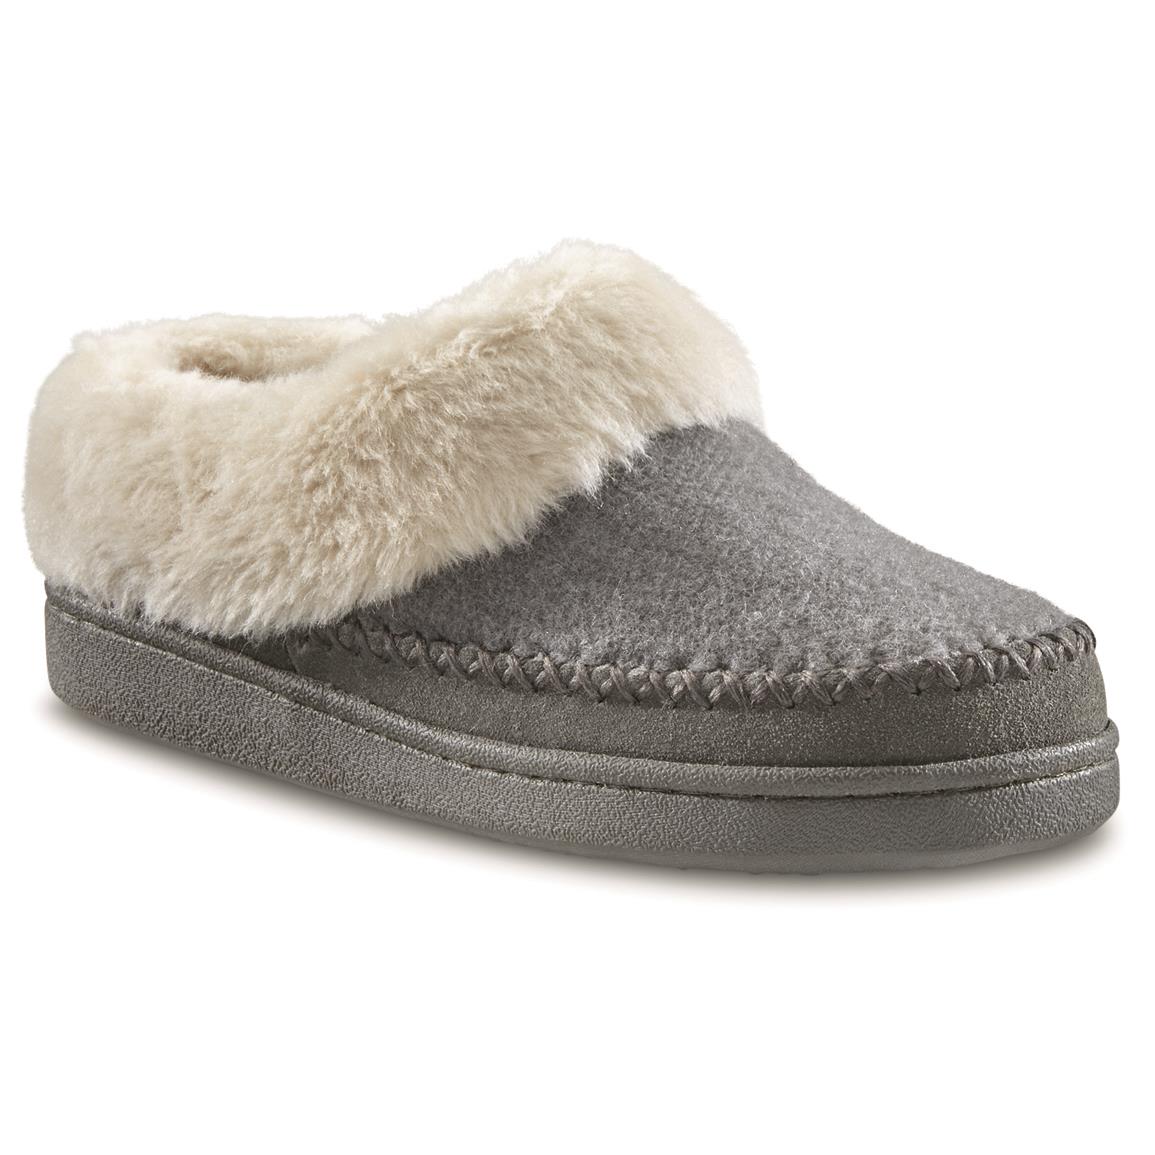 Guide Gear Women's Clog Slippers - 735609, Slippers at Sportsman's Guide